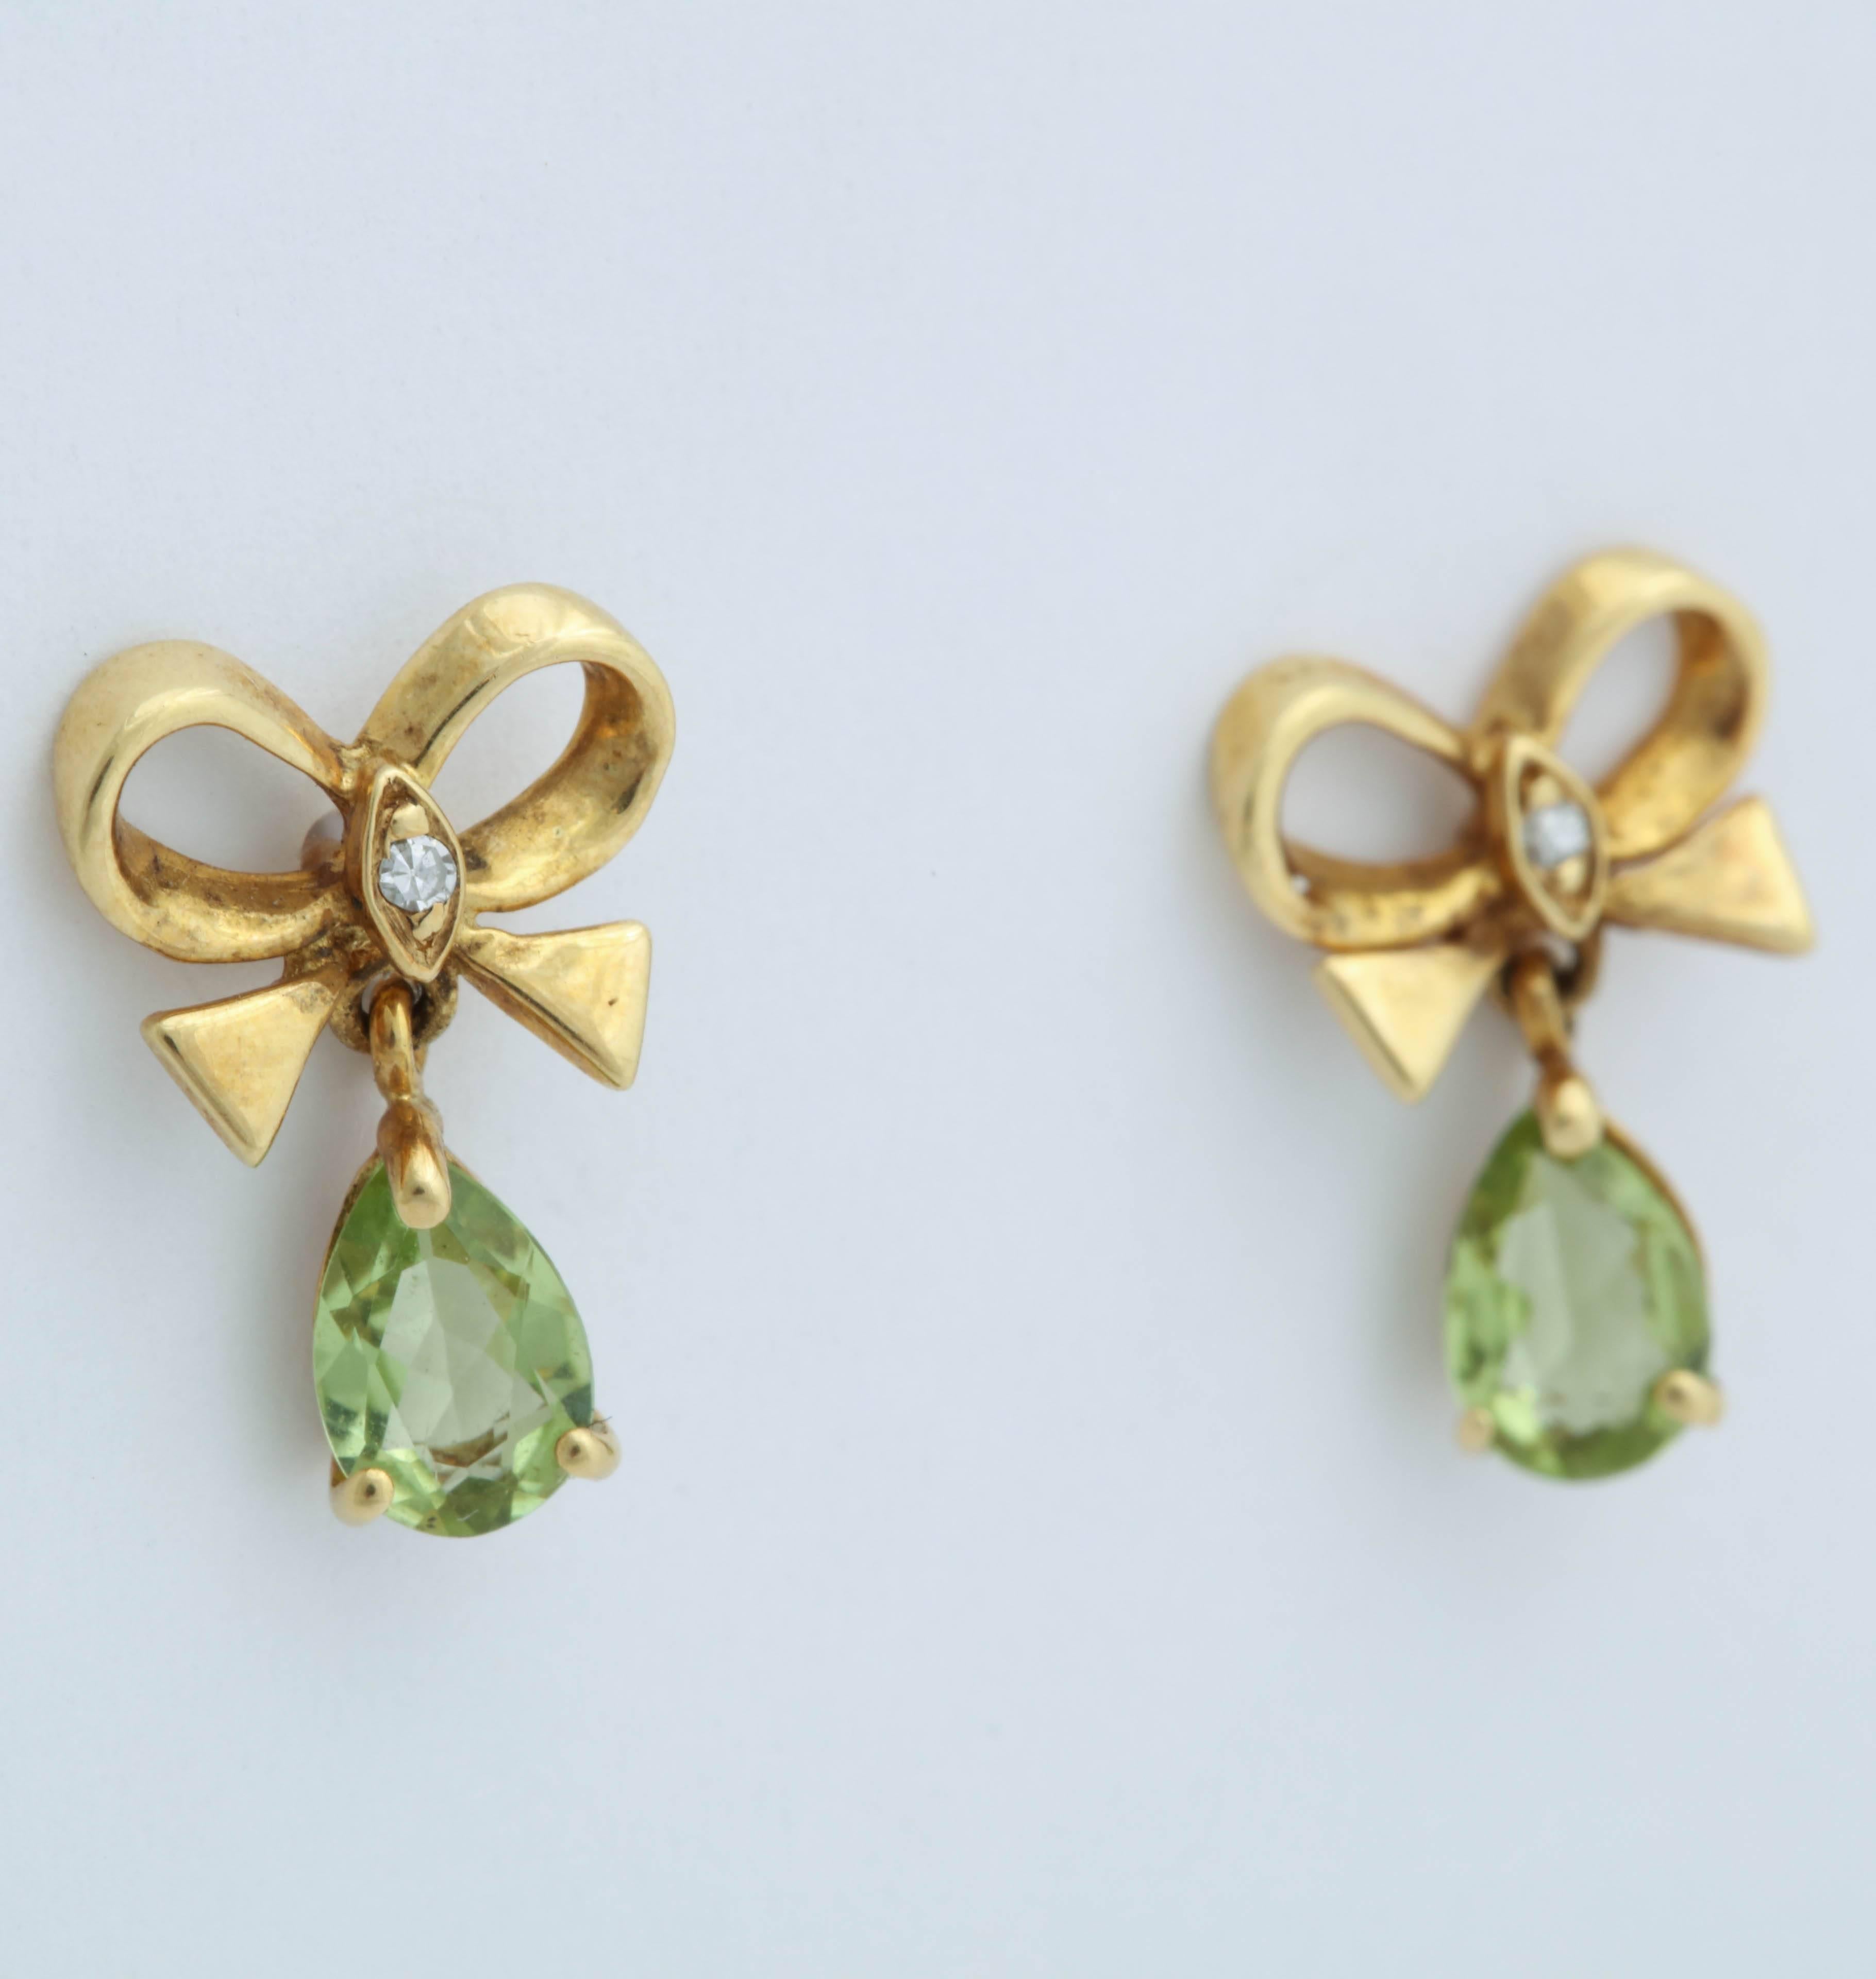 These are sweet 14 kt yellow gold bow earrings with a central diamond and a dangling pear shaped peridot.  The peridots are 5 X 7 mm and can be ordered with an amethyst or a citrine instead of the peridot.